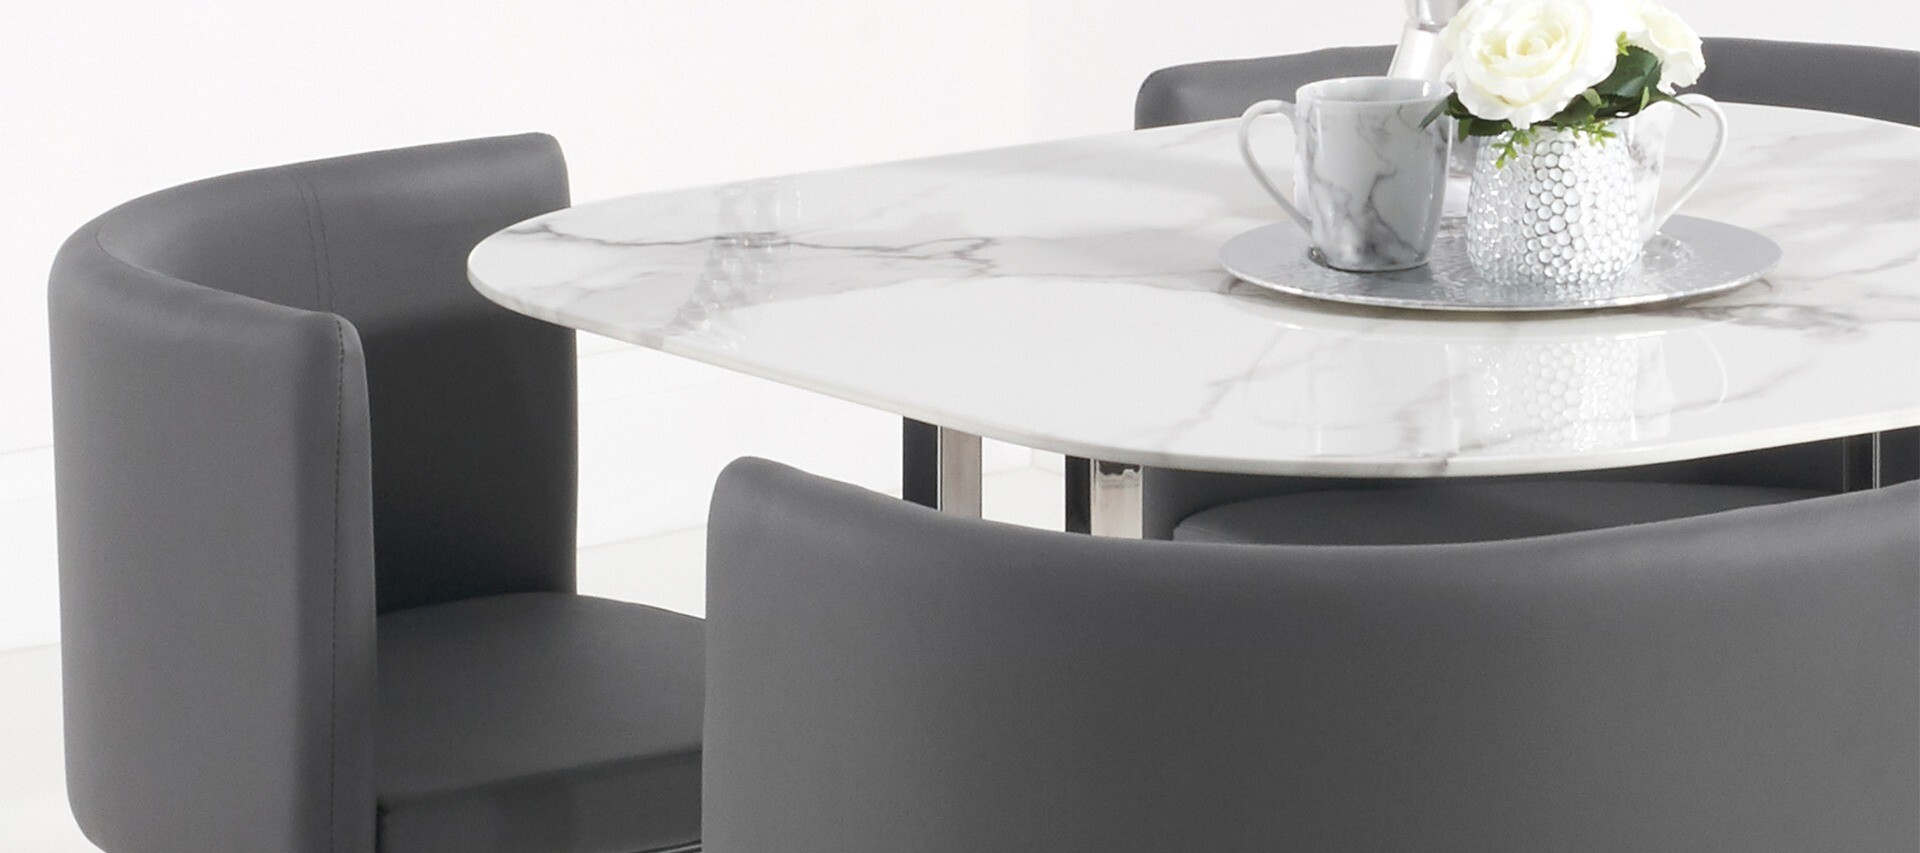 Photo 3 of Algarve white marble dining table